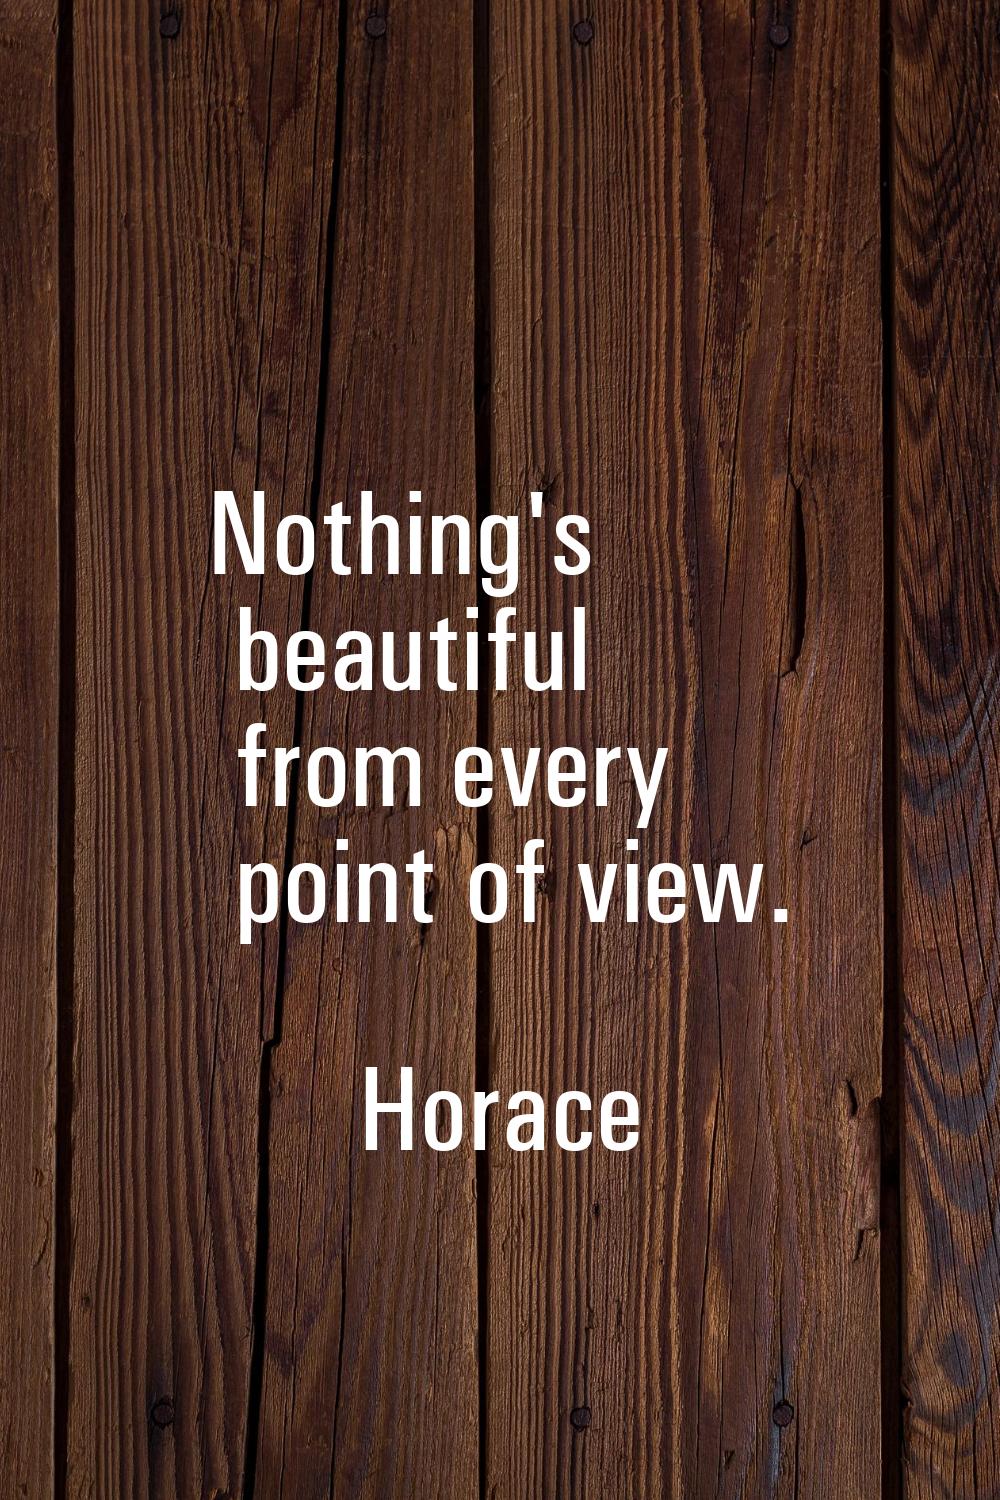 Nothing's beautiful from every point of view.